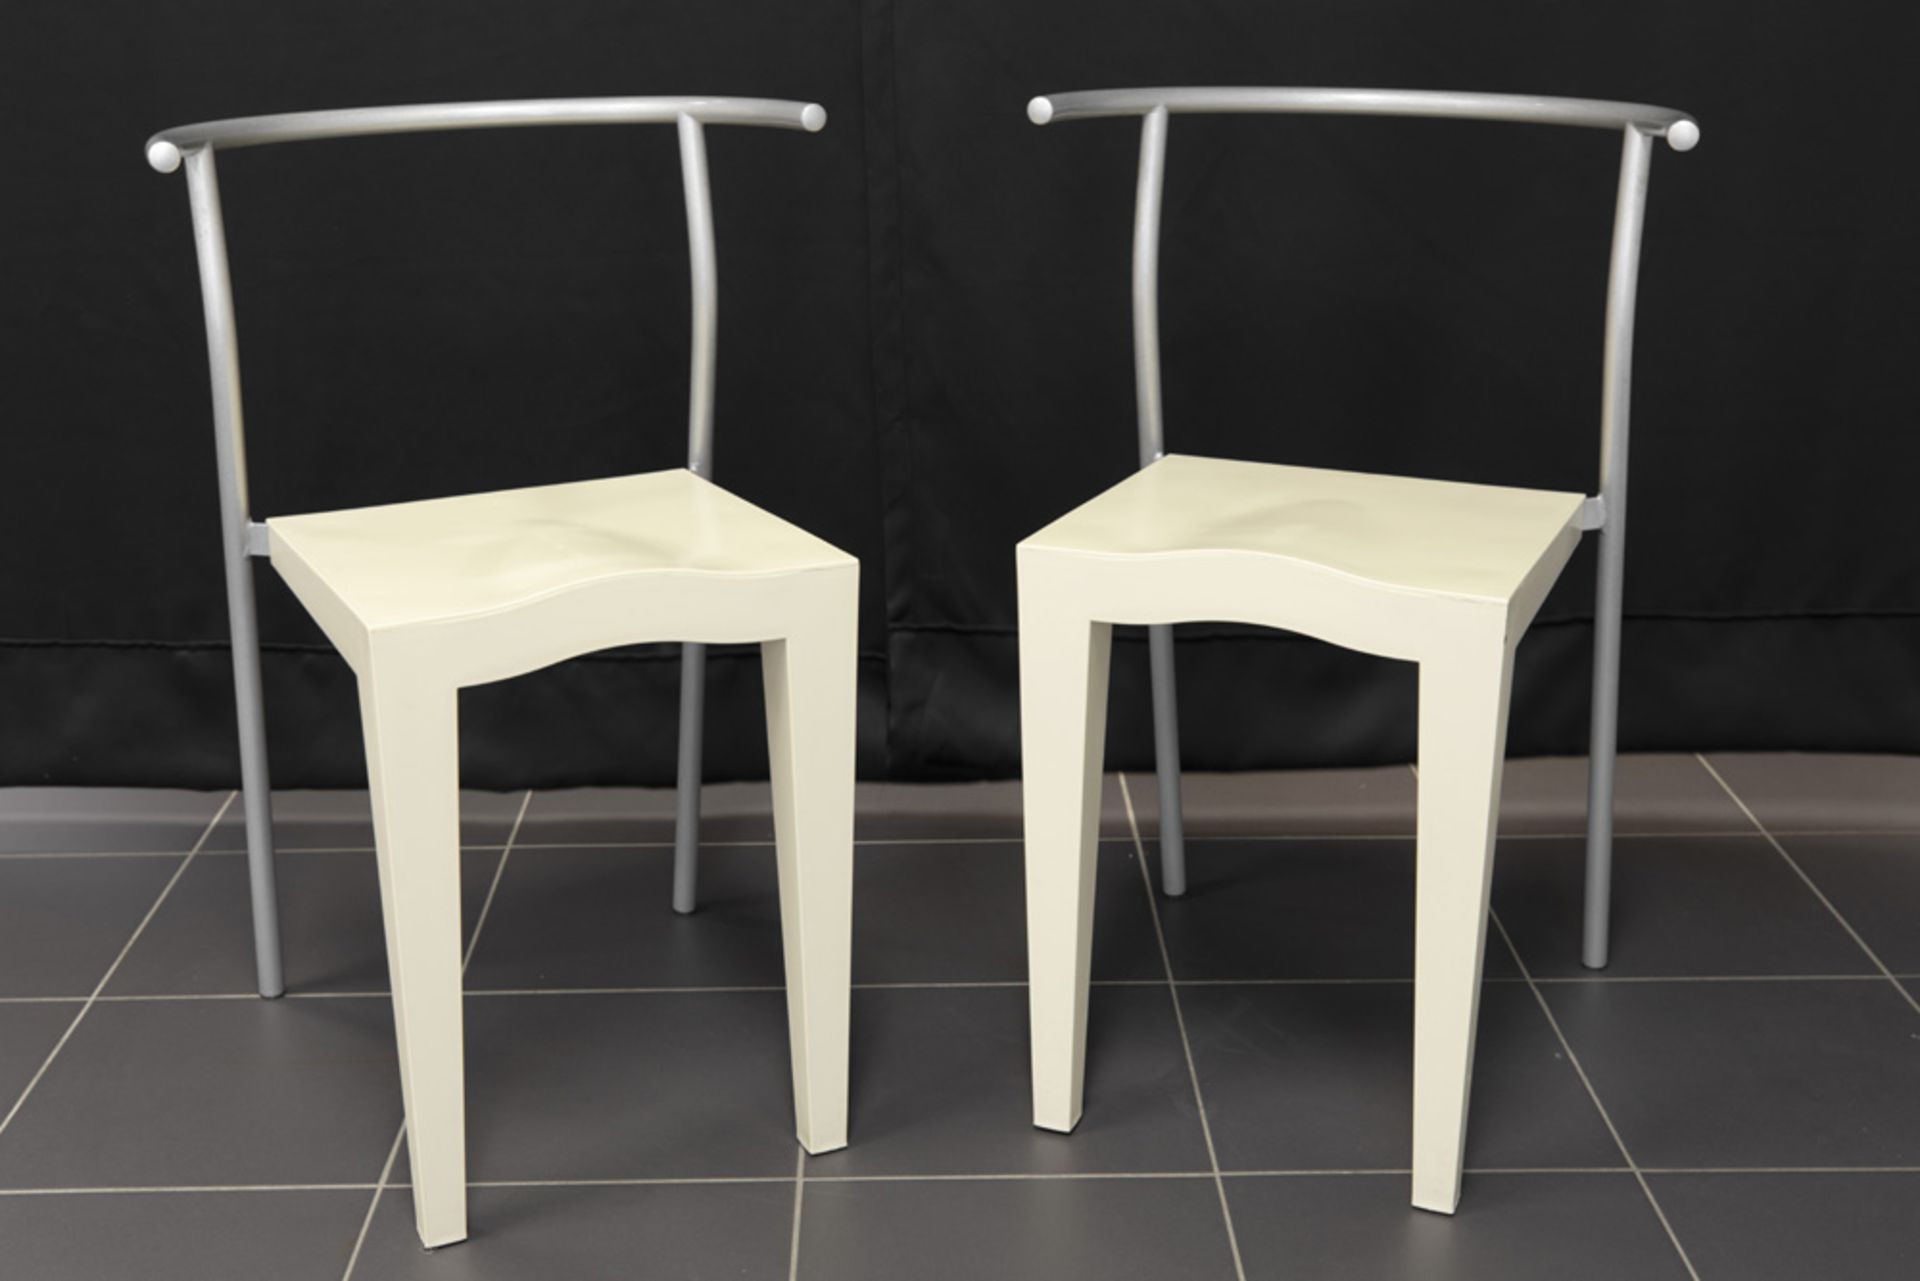 pair of Philippe Starck "Dr Glob" design chairs by Kartell - marked || STARCK PHILIPPE (° 1949) paar